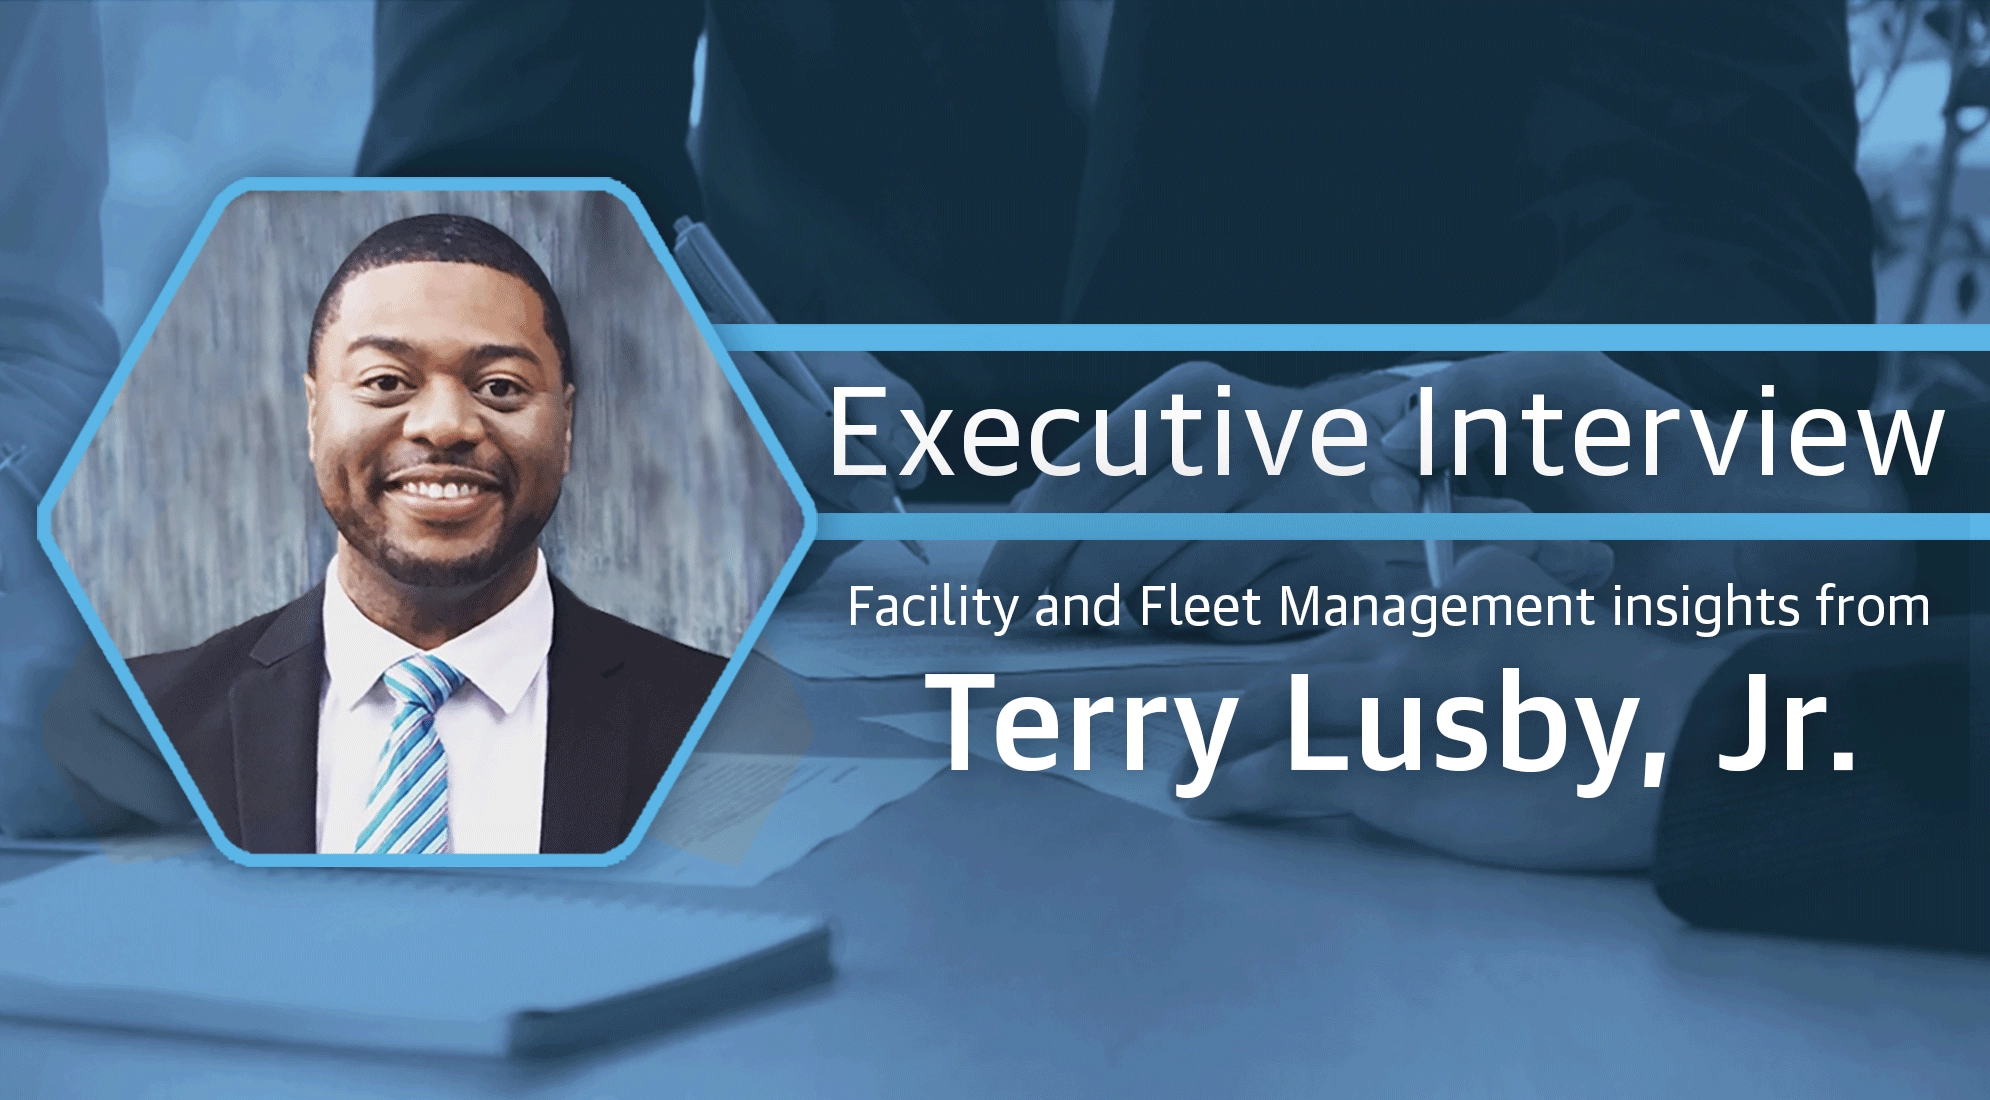 Facilities and Fleet Management Insights from Terry Lusby, Jr. 2